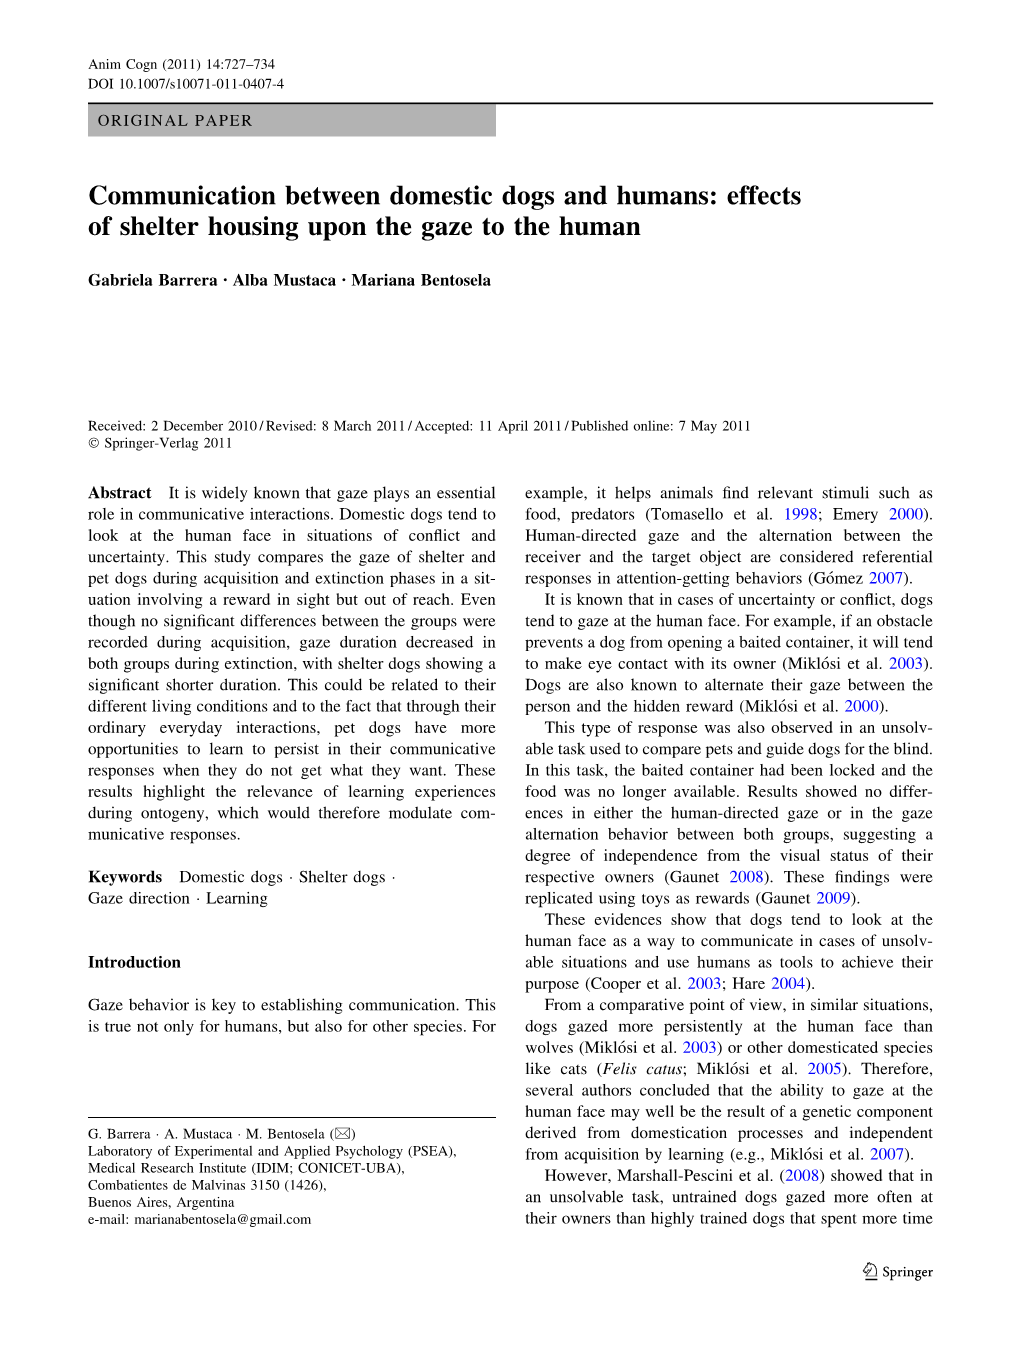 Communication Between Domestic Dogs and Humans: Effects of Shelter Housing Upon the Gaze to the Human